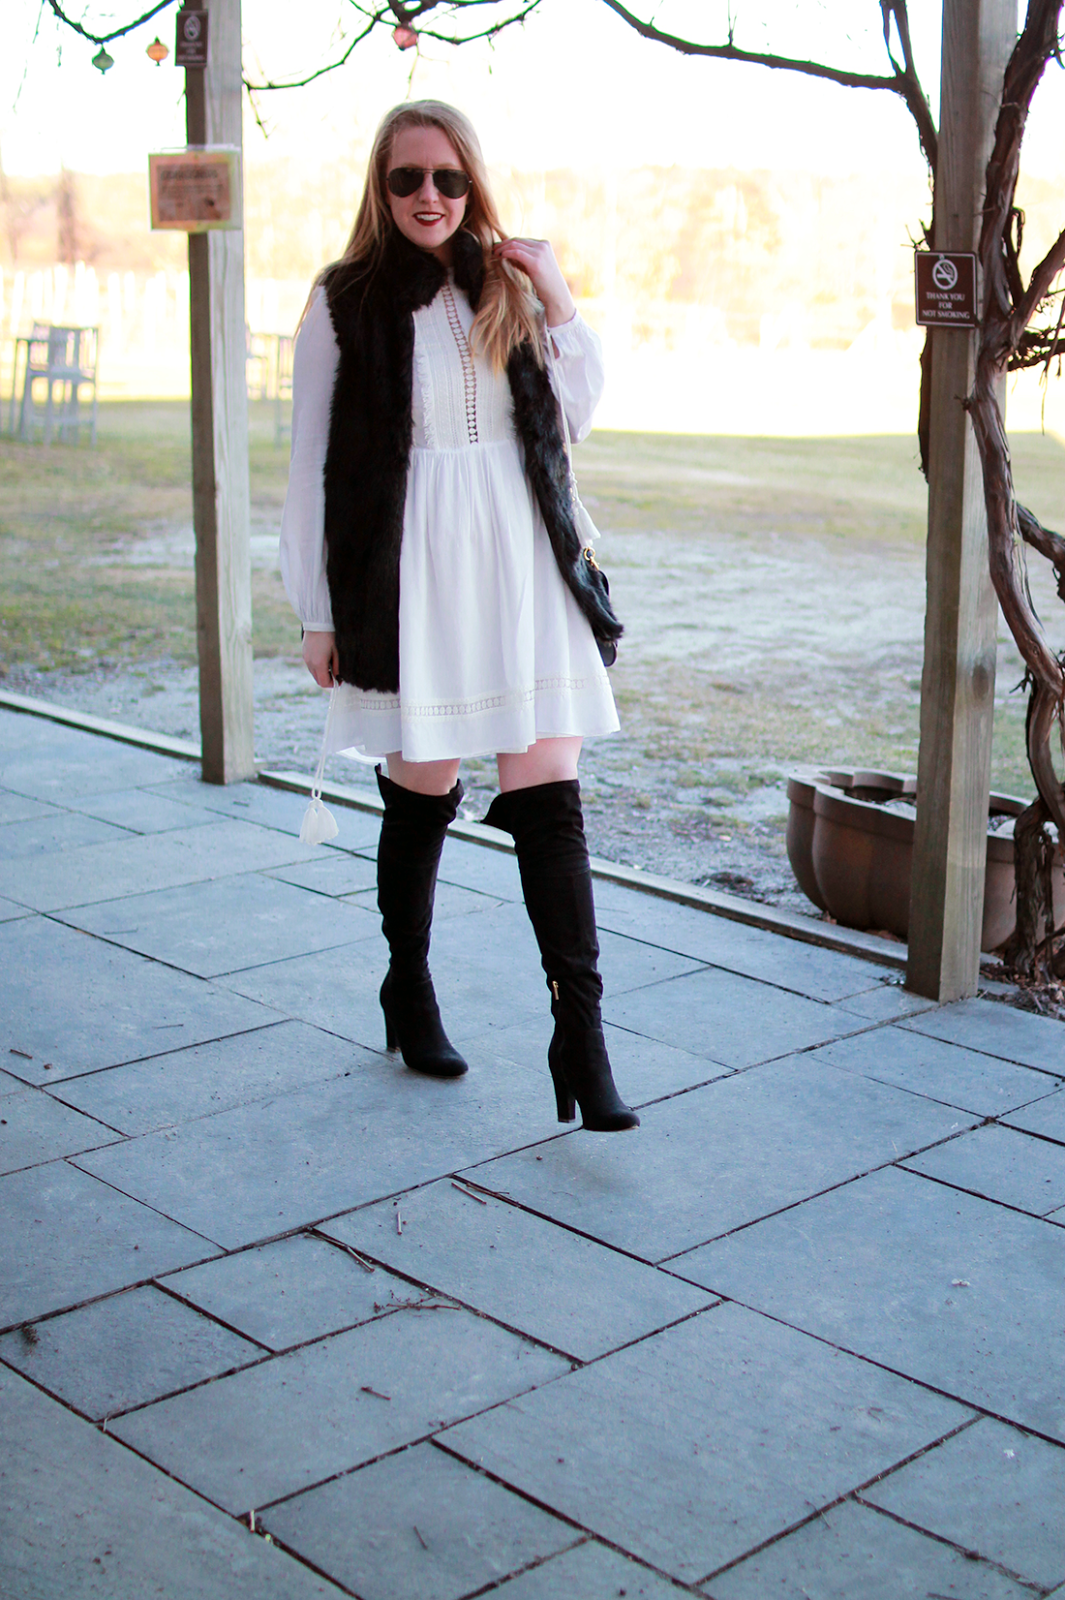 How To Wear A White Mini Dress In Winter?